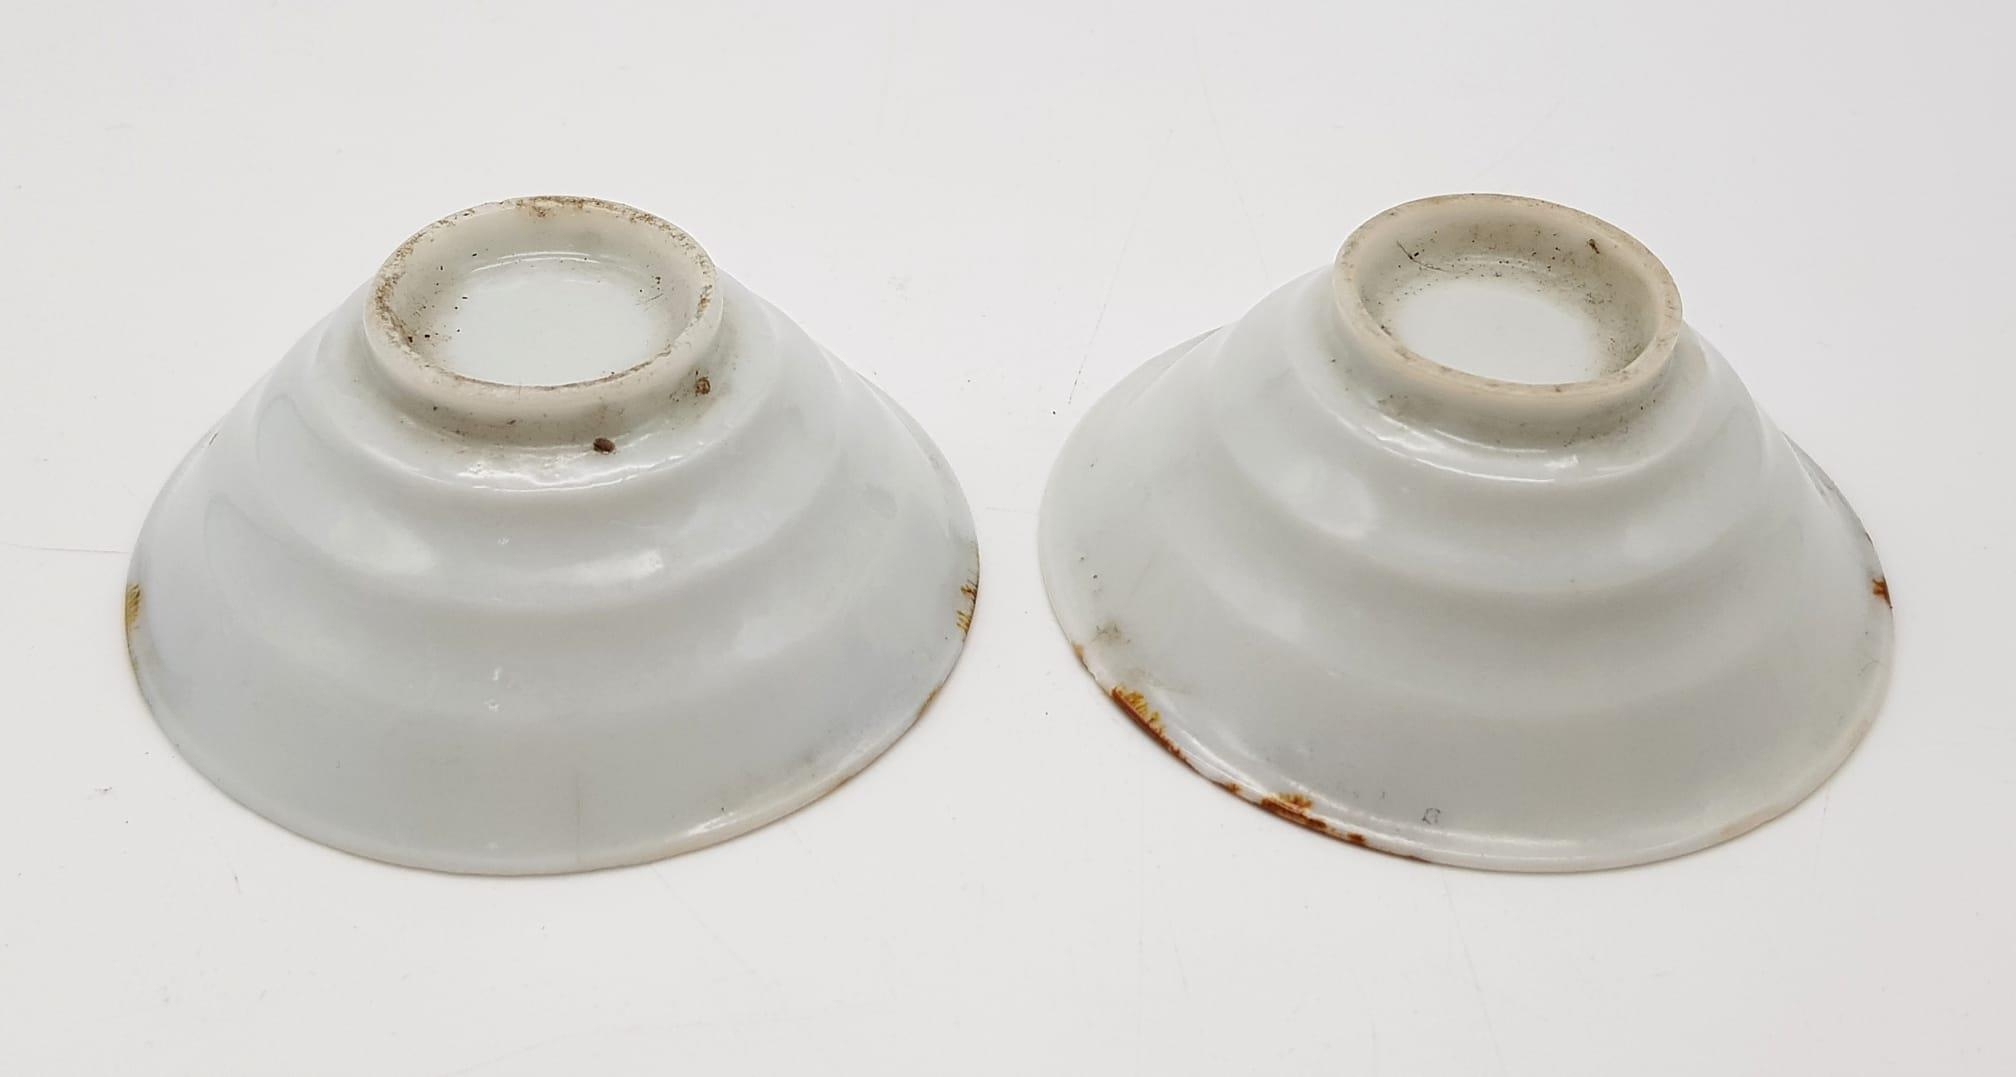 A Pair of Antique Bone China Chinese Cups circa 1720s. 6.5cm in diameter and 2.5cm tall. - Image 4 of 4